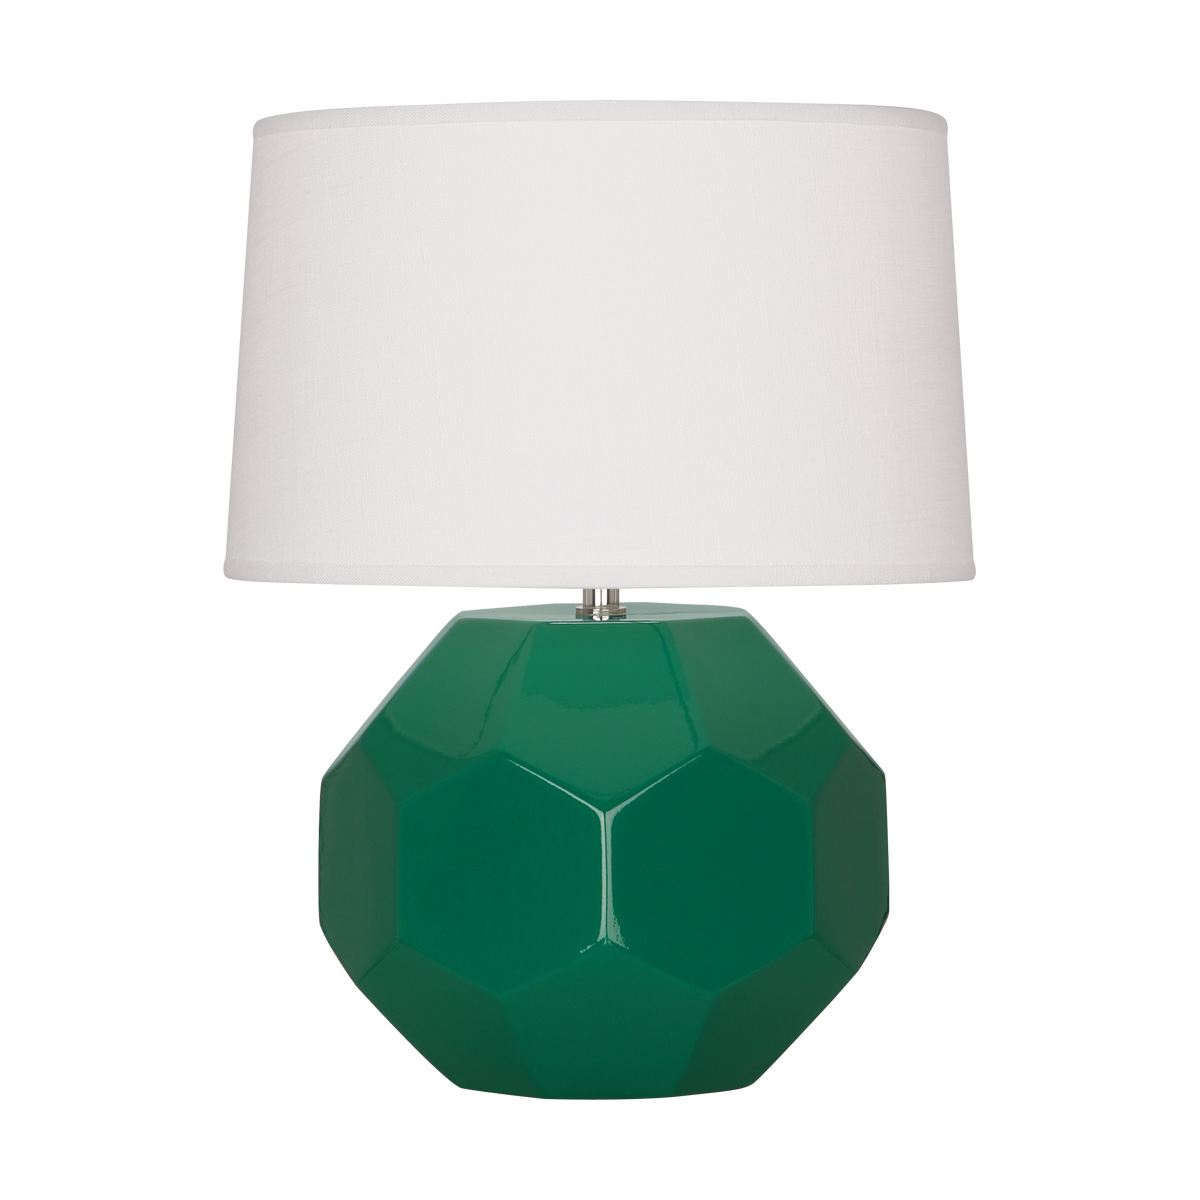 Franklin Accent Lamp Style #EG02